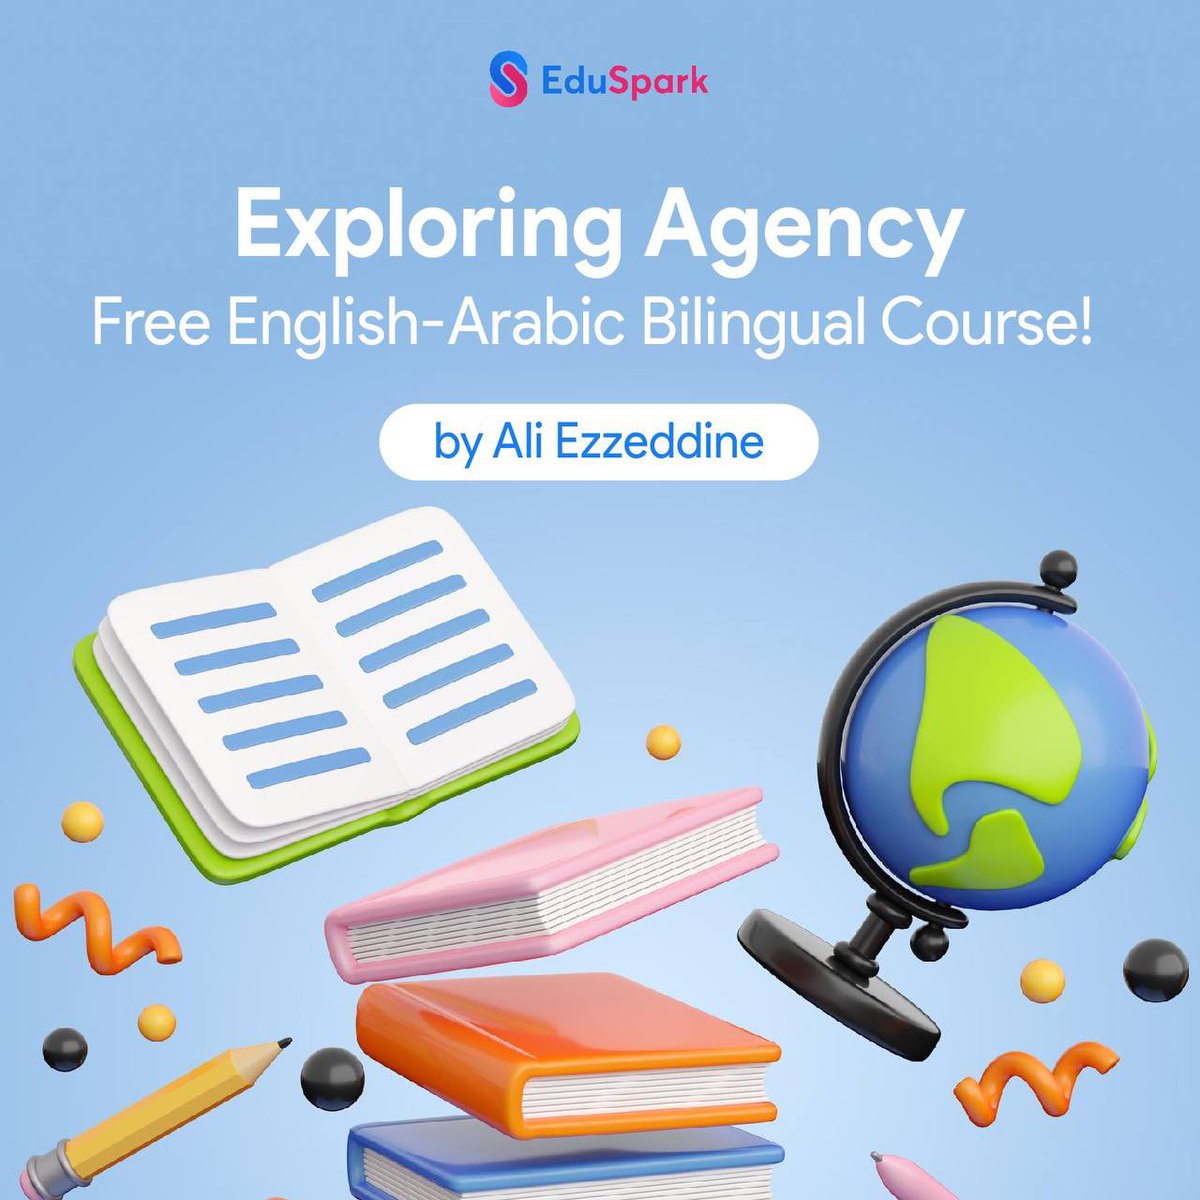 📢 Exciting news! Join 'Let's Discuss Agency,' a unique English-Arabic Bilingual Course by Ali. Dive into agency through engaging videos, discussions, and FREE access! Sign up now! eduspark.world/courses/agency… @ali_ezzeddine_